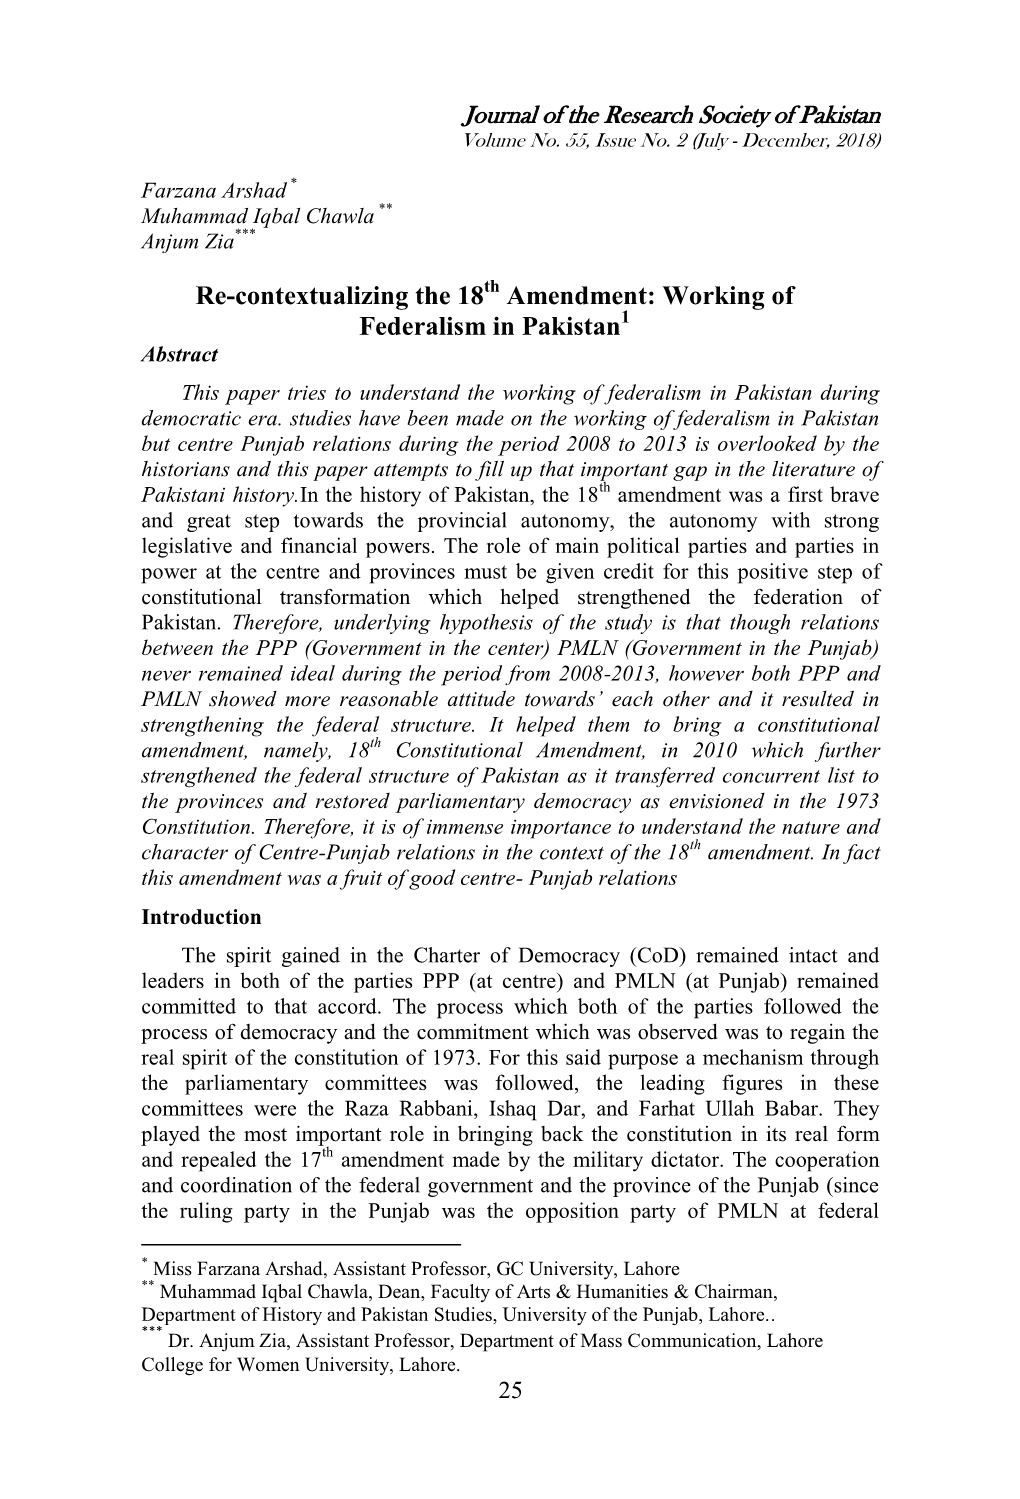 Re-Contextualizing the 18 Amendment: Working of Federalism in Pakistan